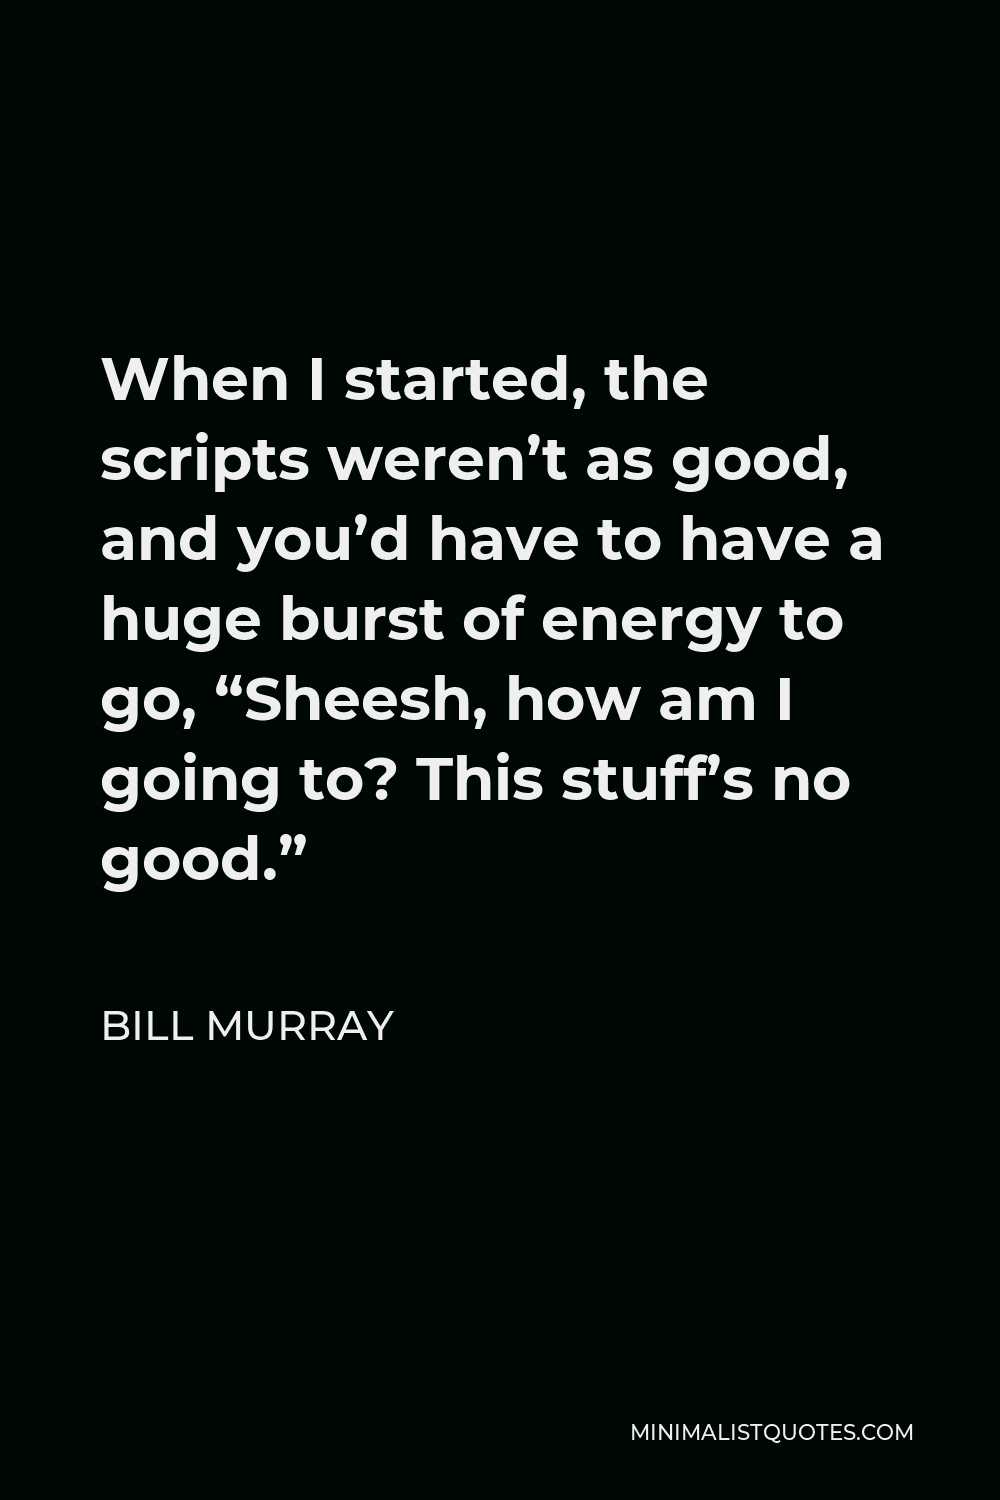 Bill Murray Quote - When I started, the scripts weren’t as good, and you’d have to have a huge burst of energy to go, “Sheesh, how am I going to? This stuff’s no good.”